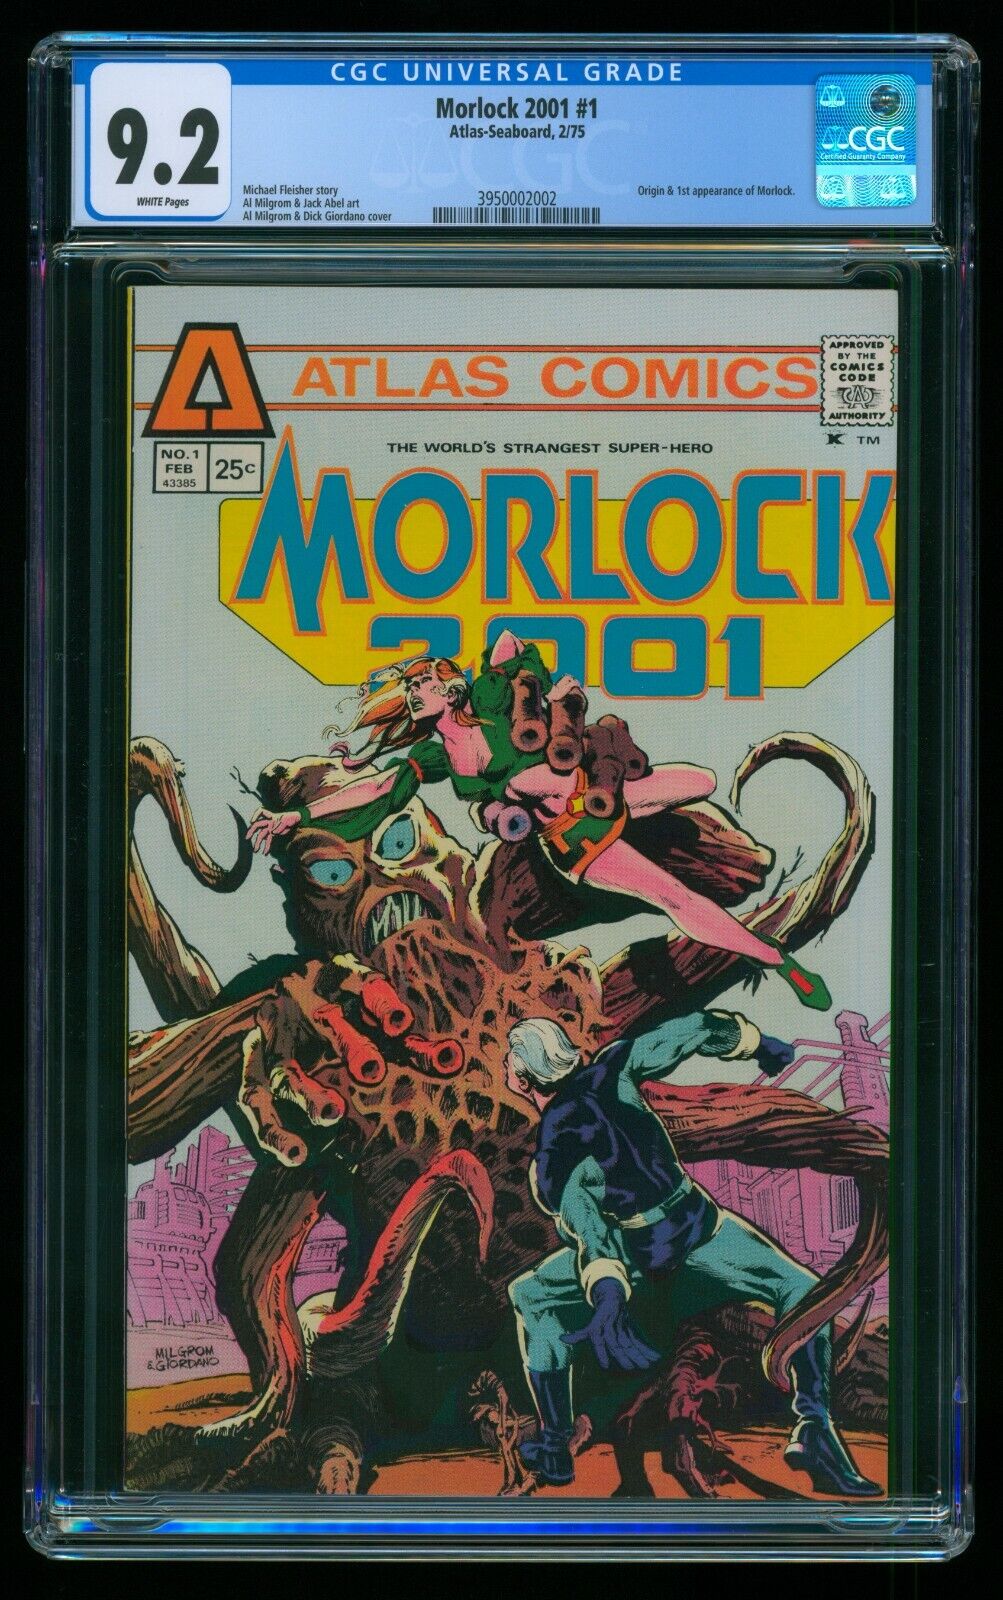 MORLOCK 2001 (1975) #1 CGC 9.2 1st APPEARANCE ORIGIN WHITE PAGES